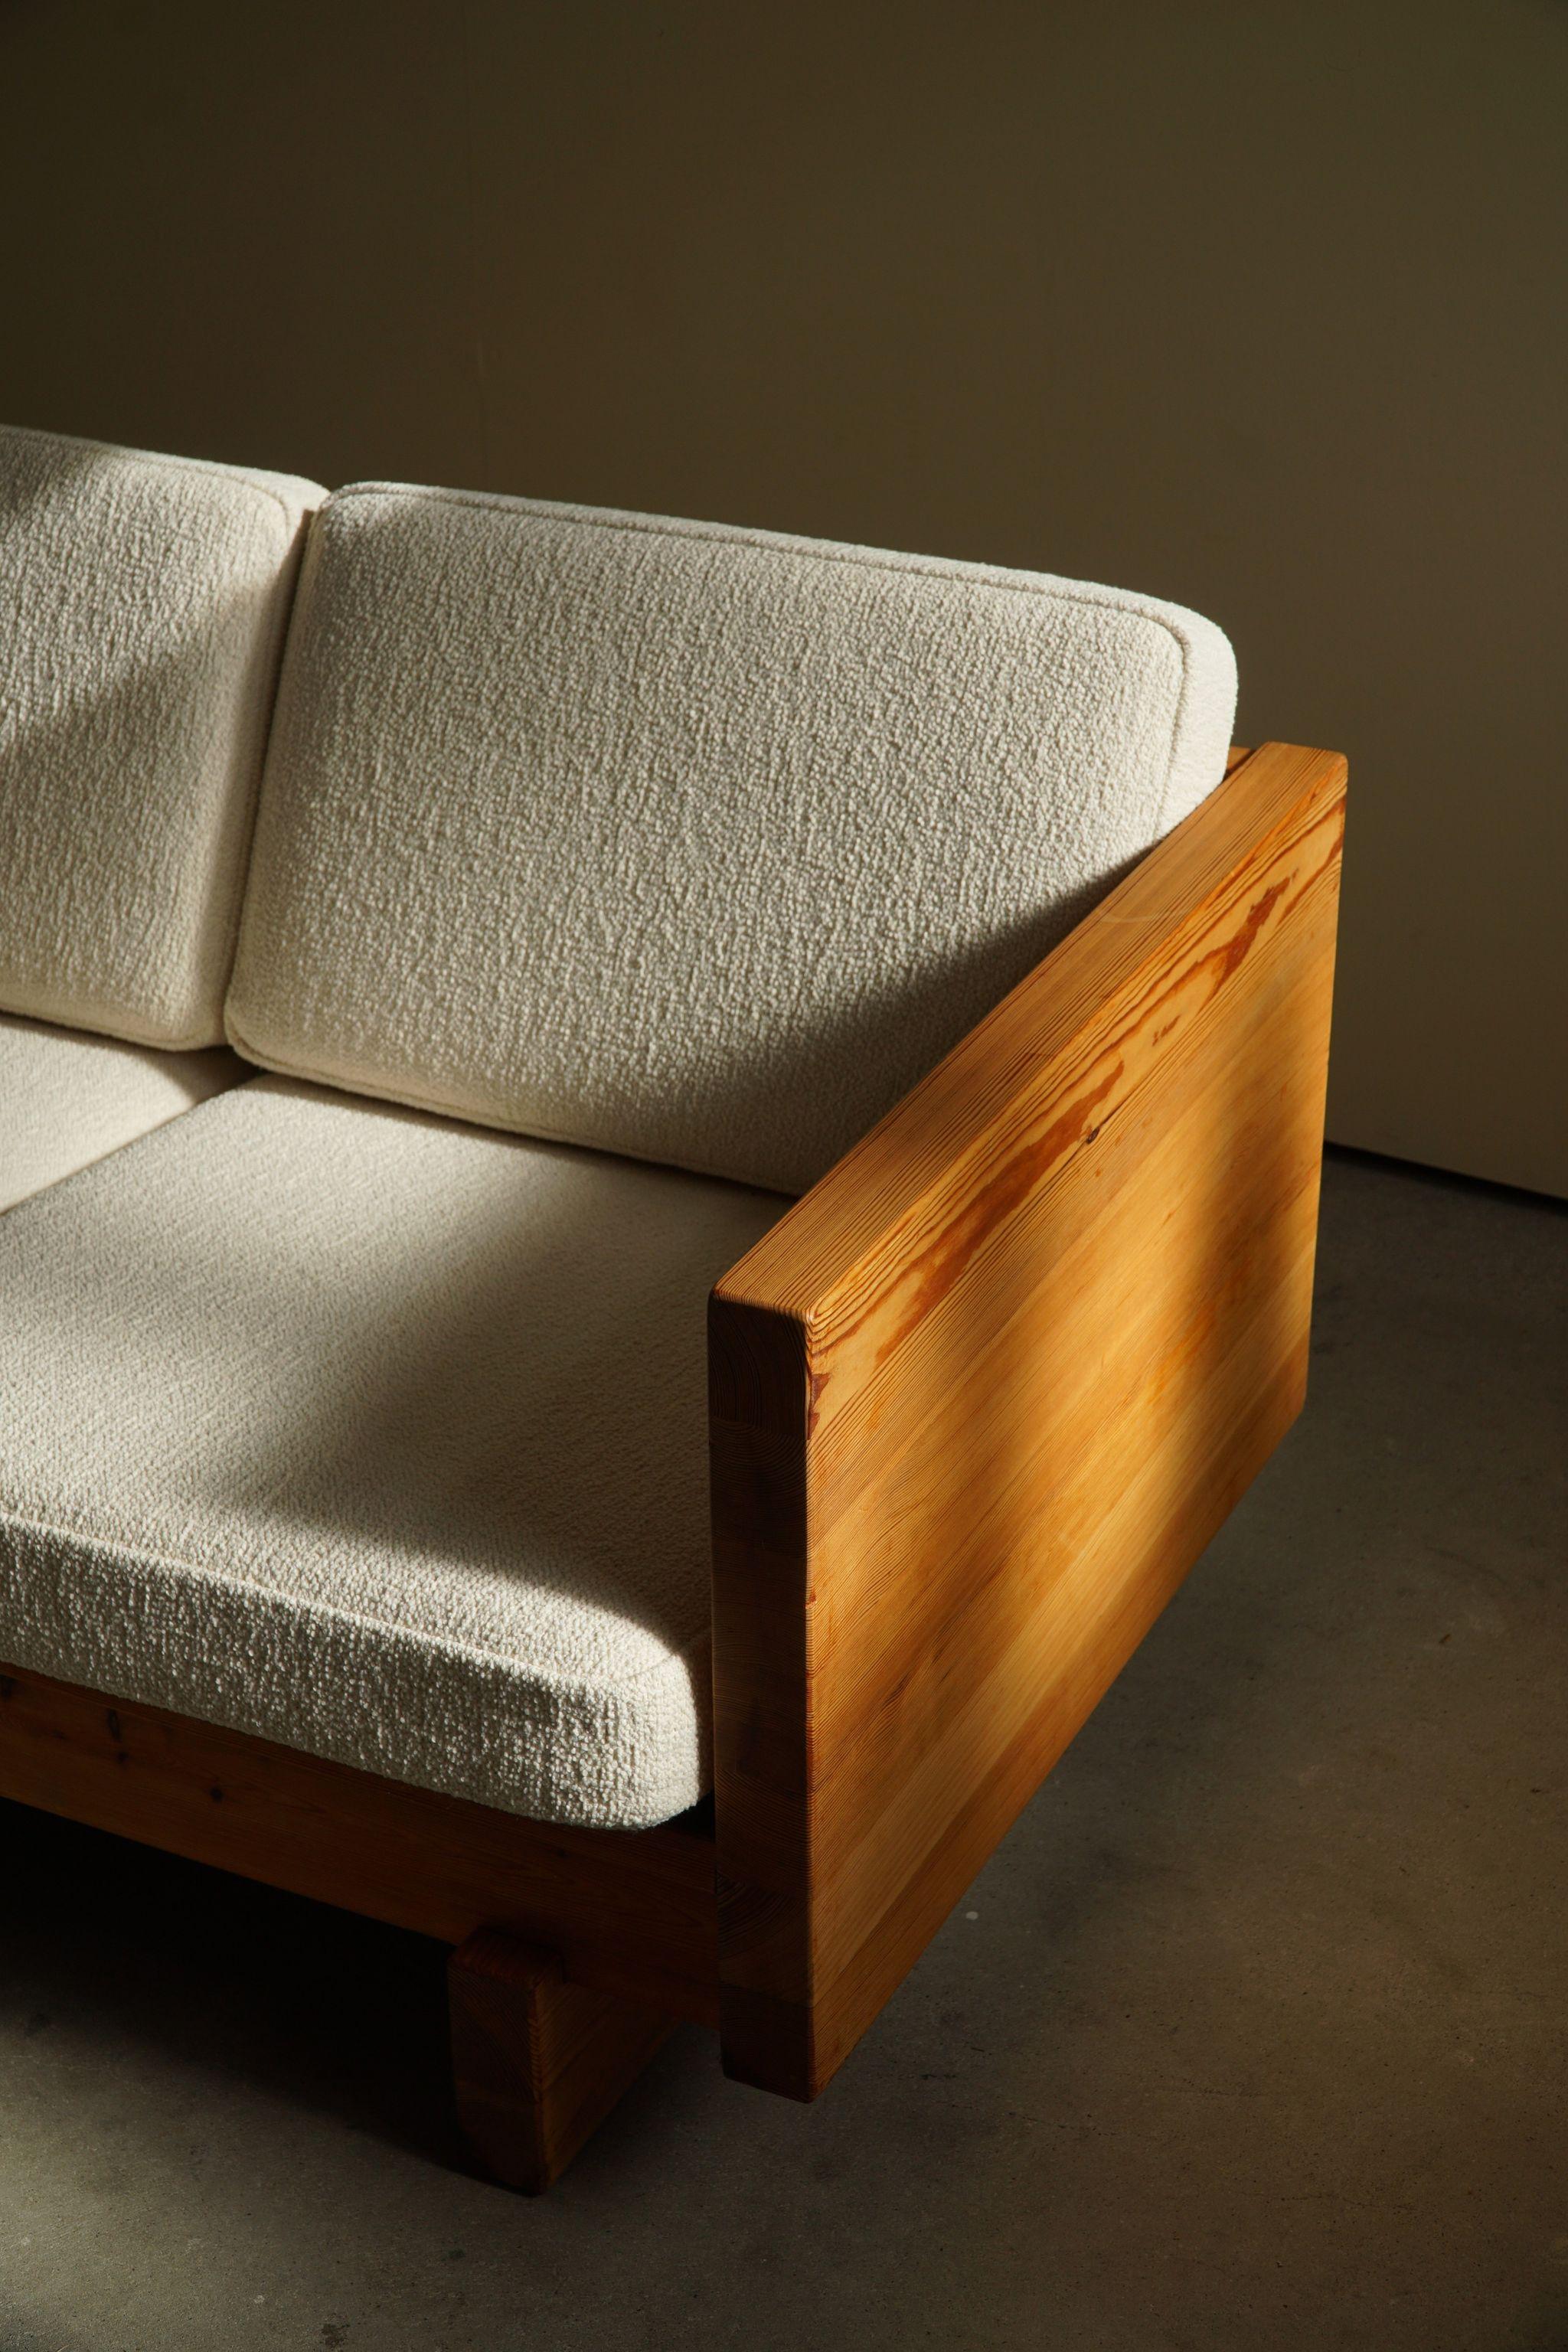 Mid-20th Century Swedish Modern, Two Seater Sofa in Solid Pine, Reupholstered in Bouclé, 1960s